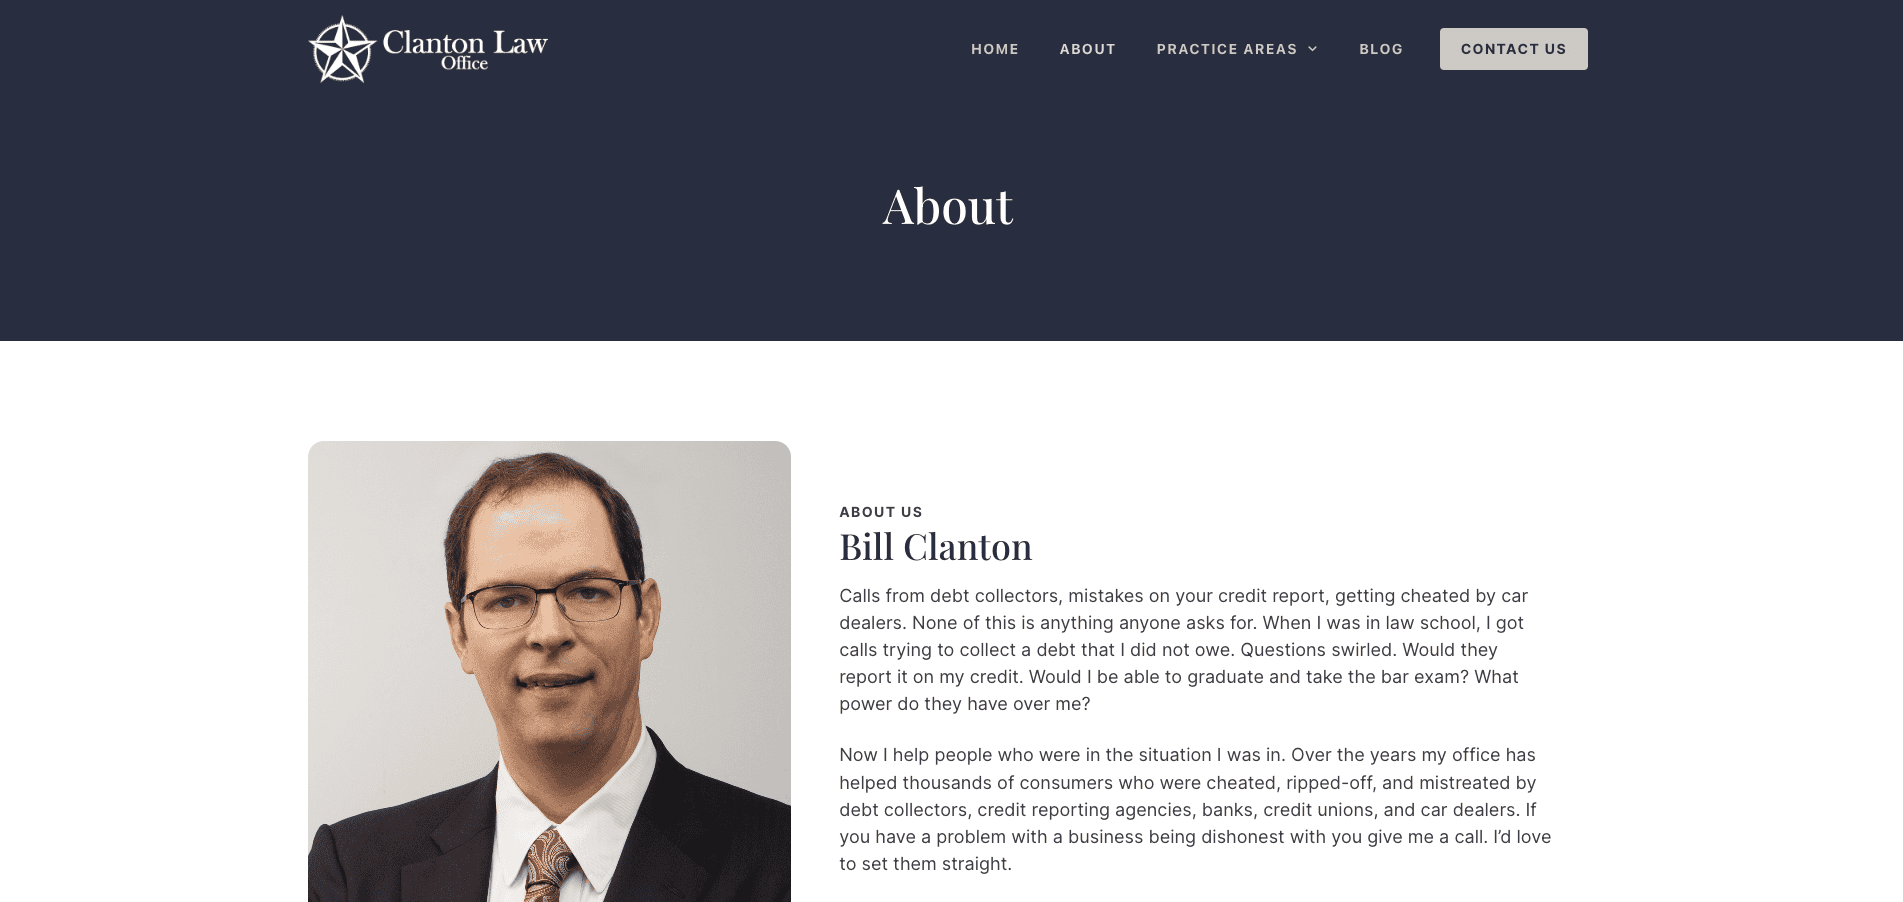 Professional portrait of a caucasian middle-aged male lawyer in a dark suit, white shirt, and red tie, with a confident smile, on the "about" page of a law firm's website. he stands against a light background.